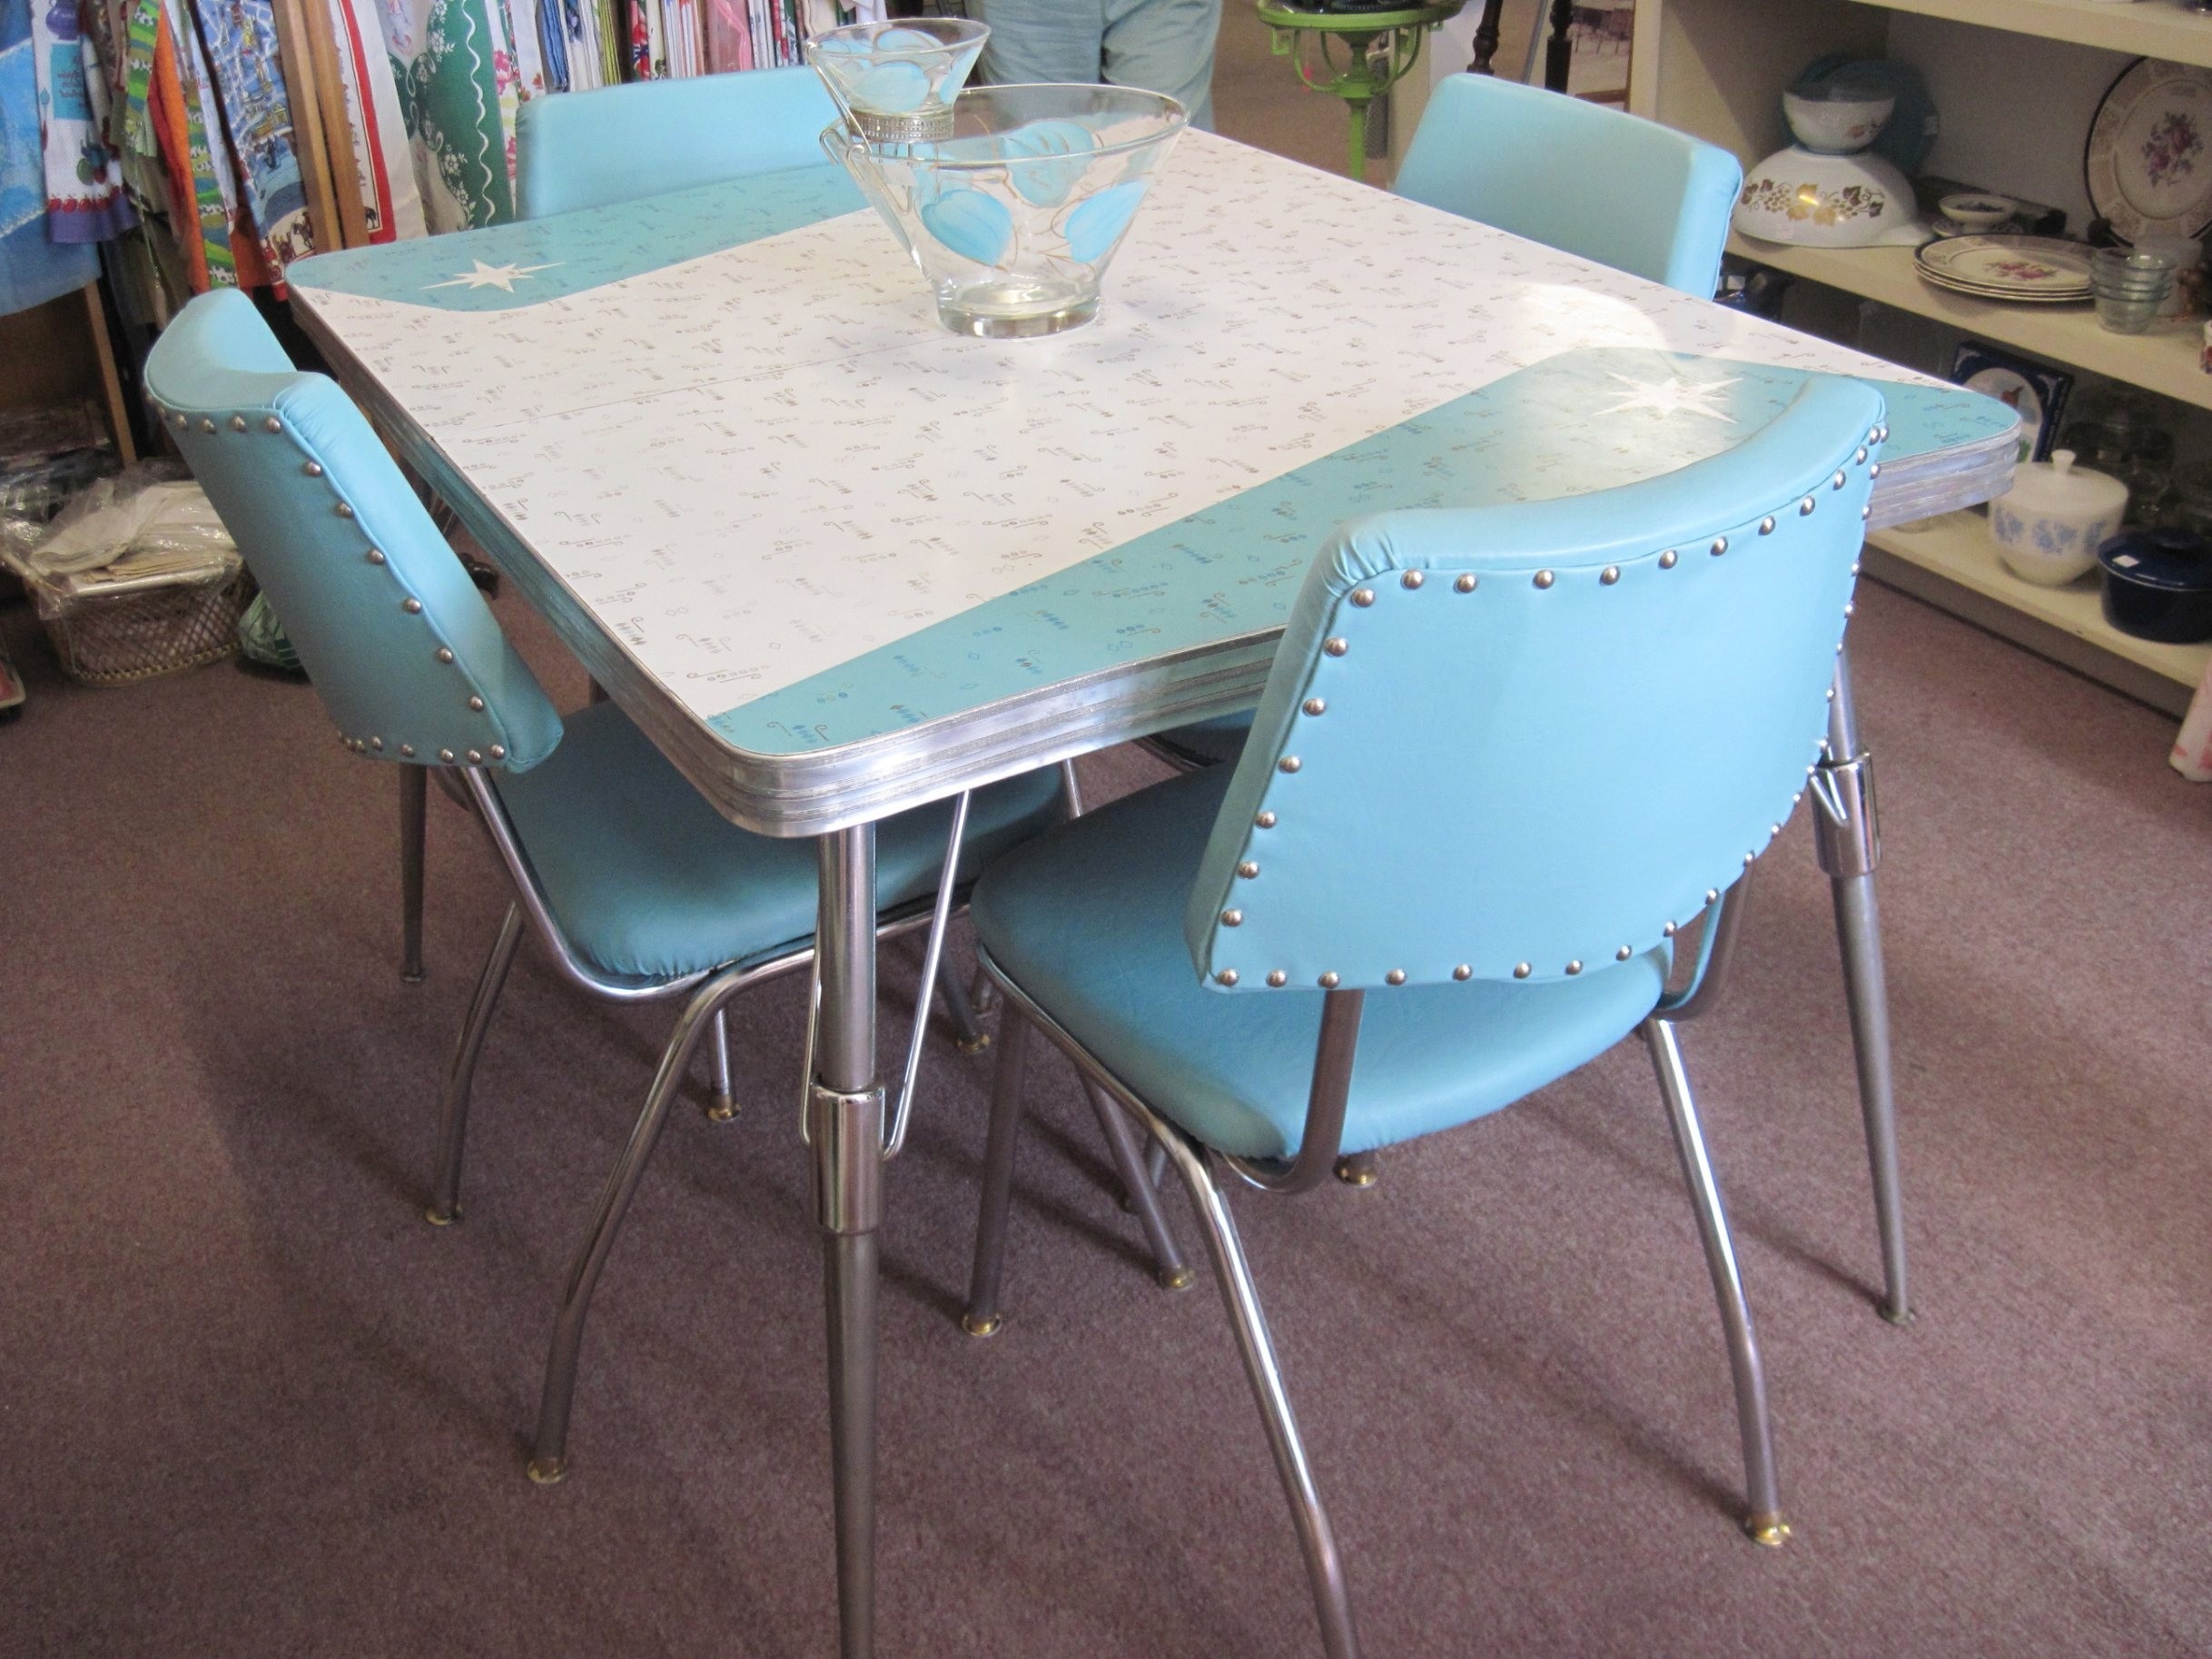 Retro kitchen tables and chairs